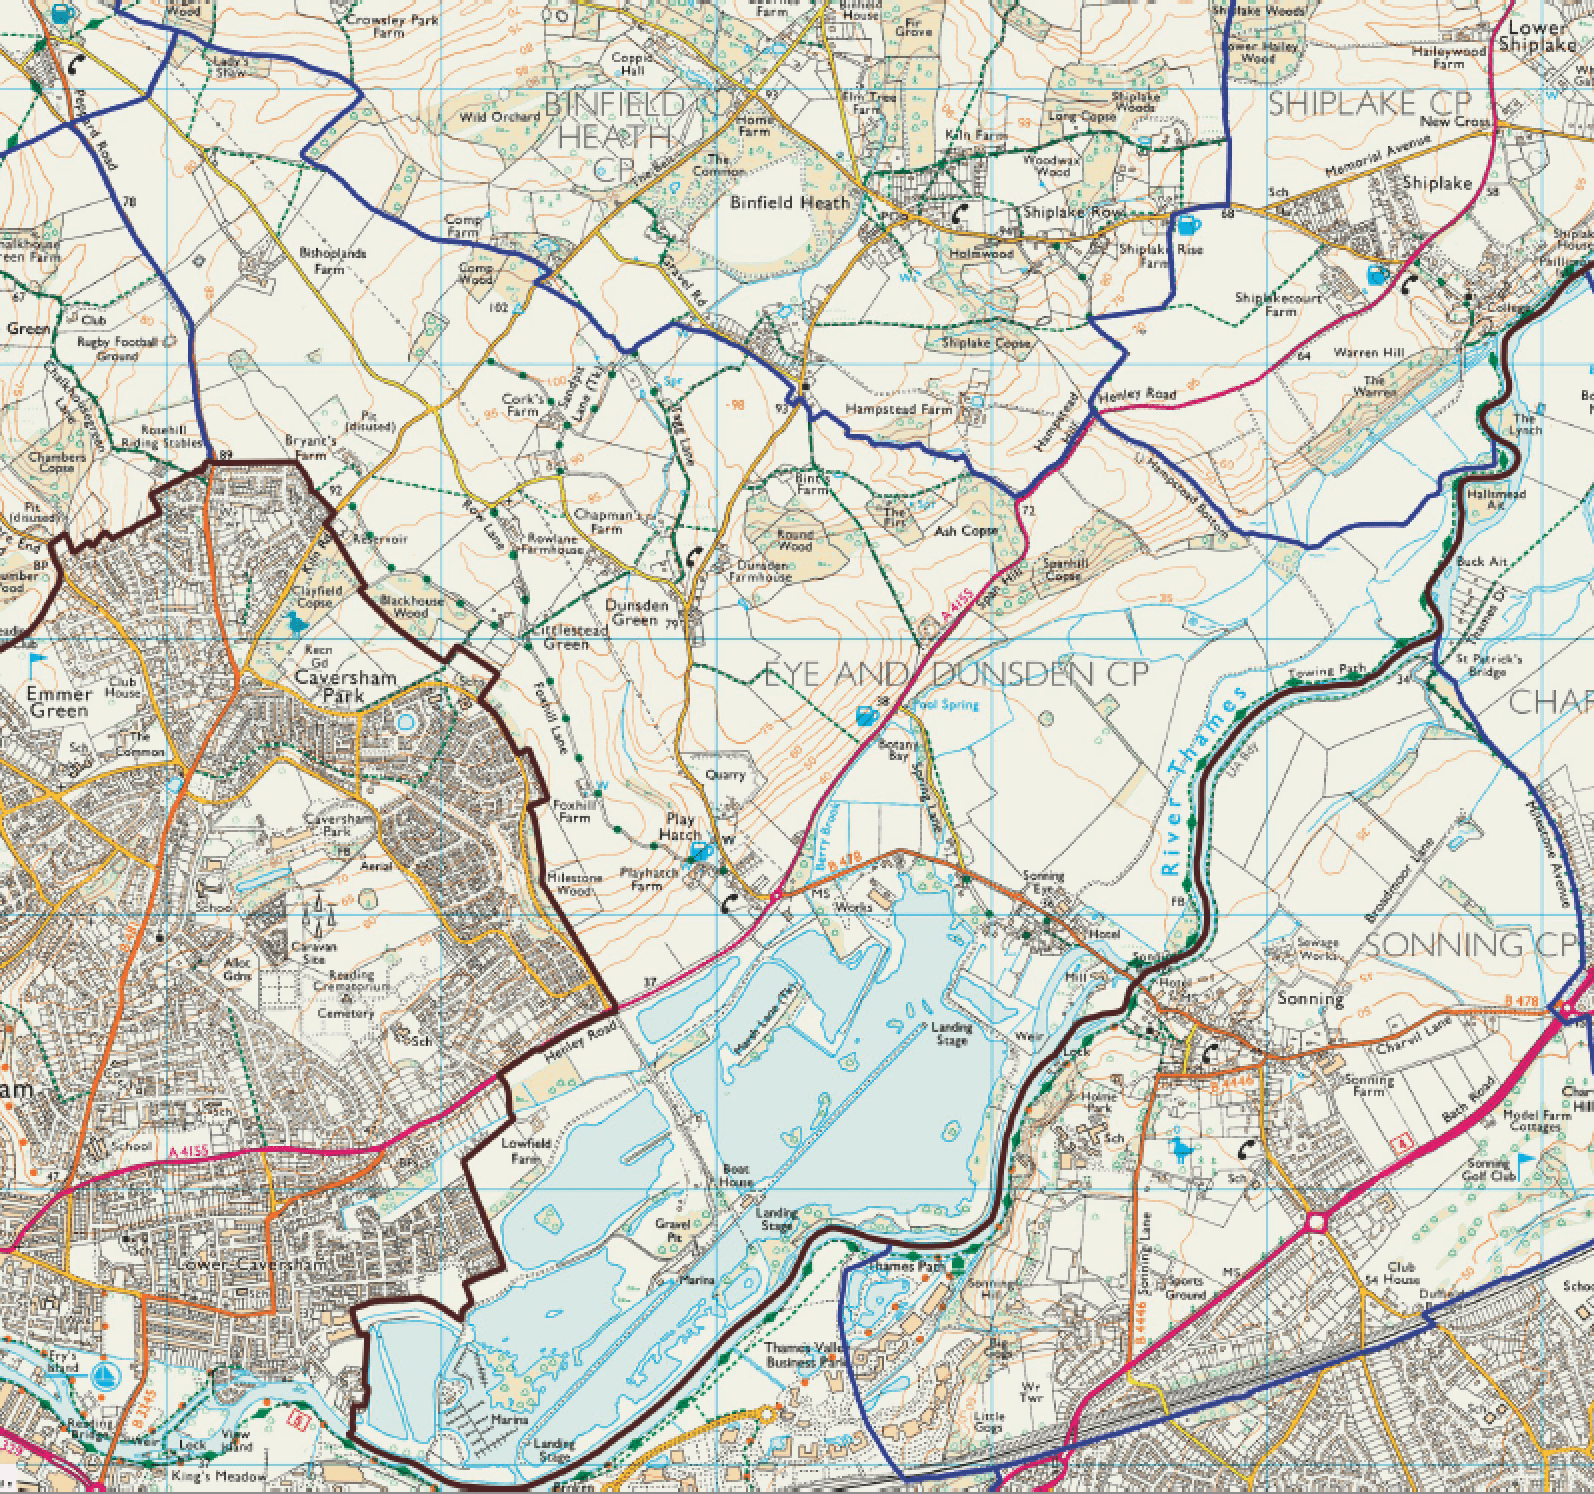 OS map of the local area